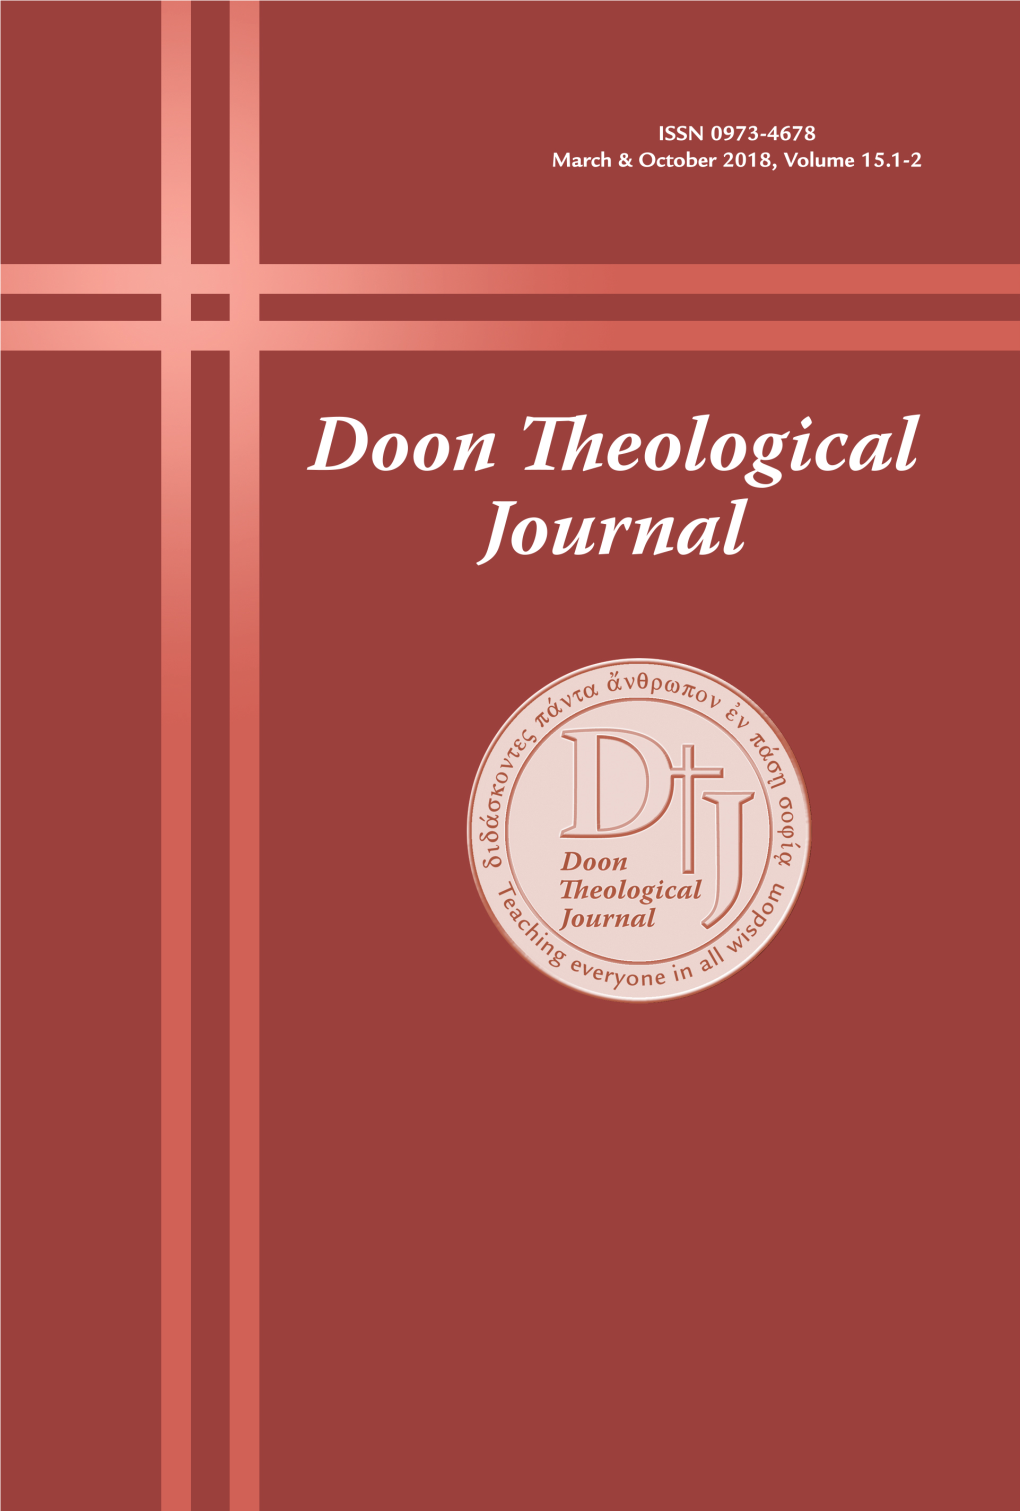 Doon Theological Journal (DTJ) Maintains an Open Submission Policy